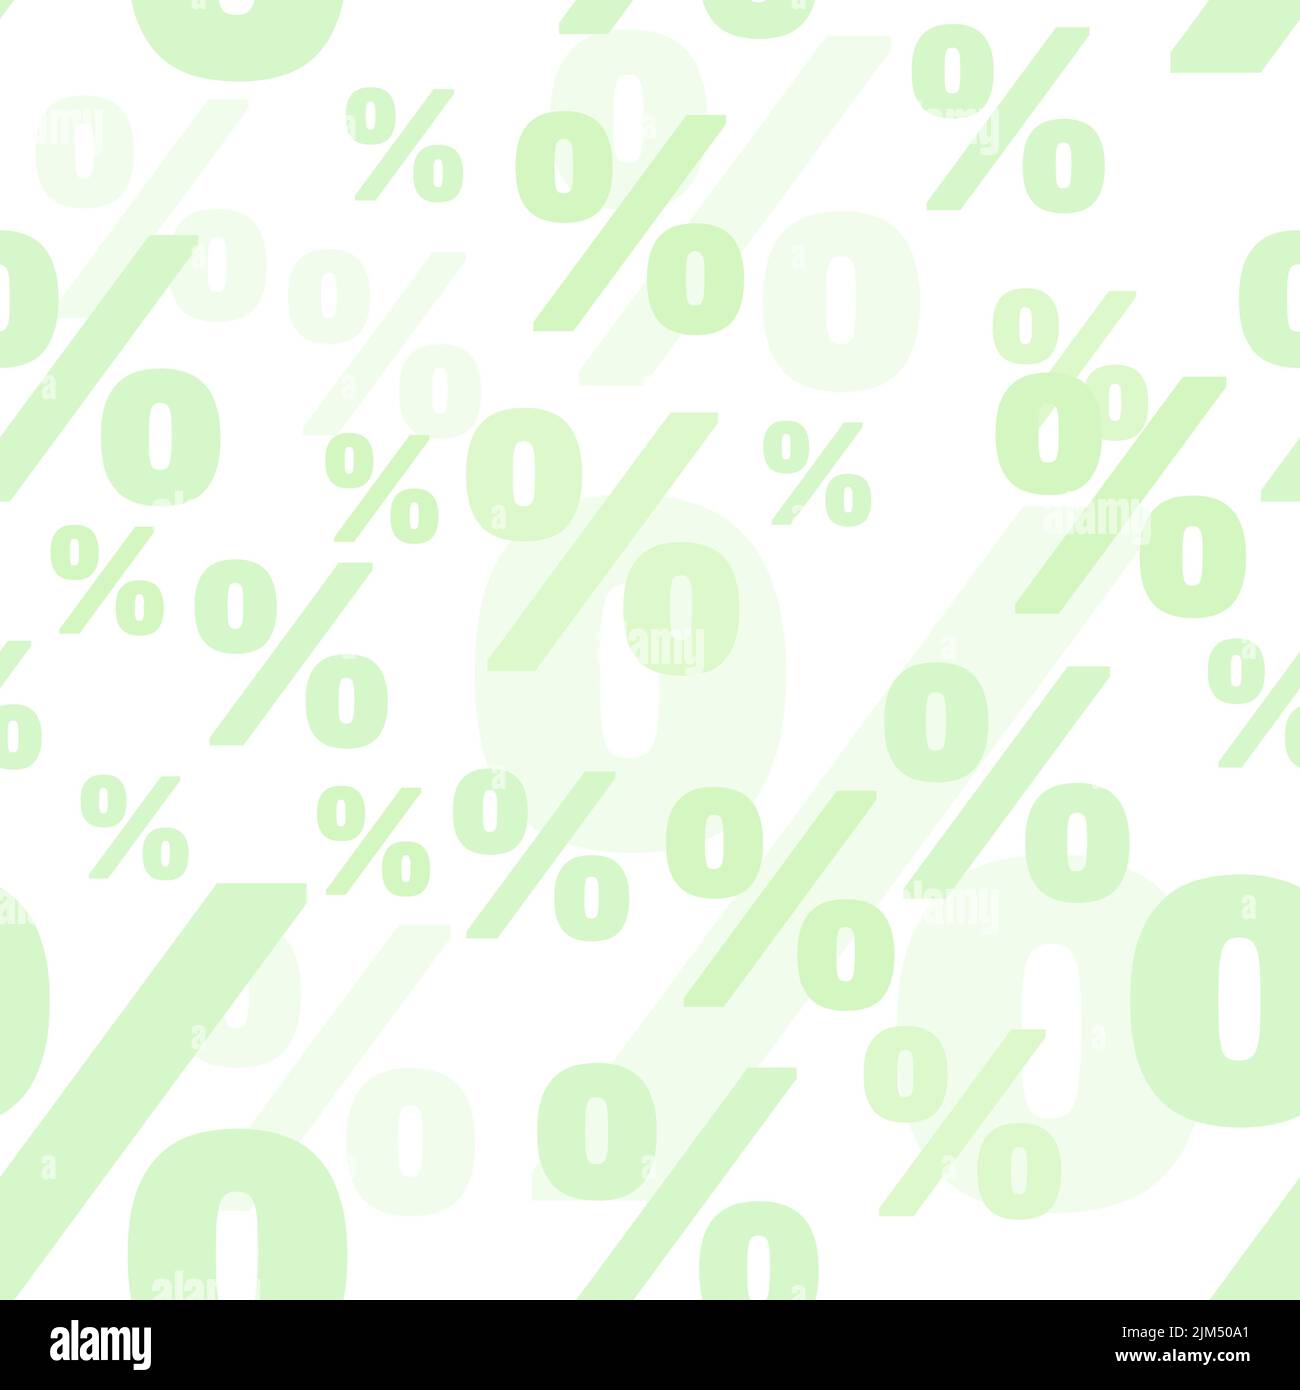 Percent seamless vector background. Advertisement promo texture with percent symbol. Light green color. Stock Vector